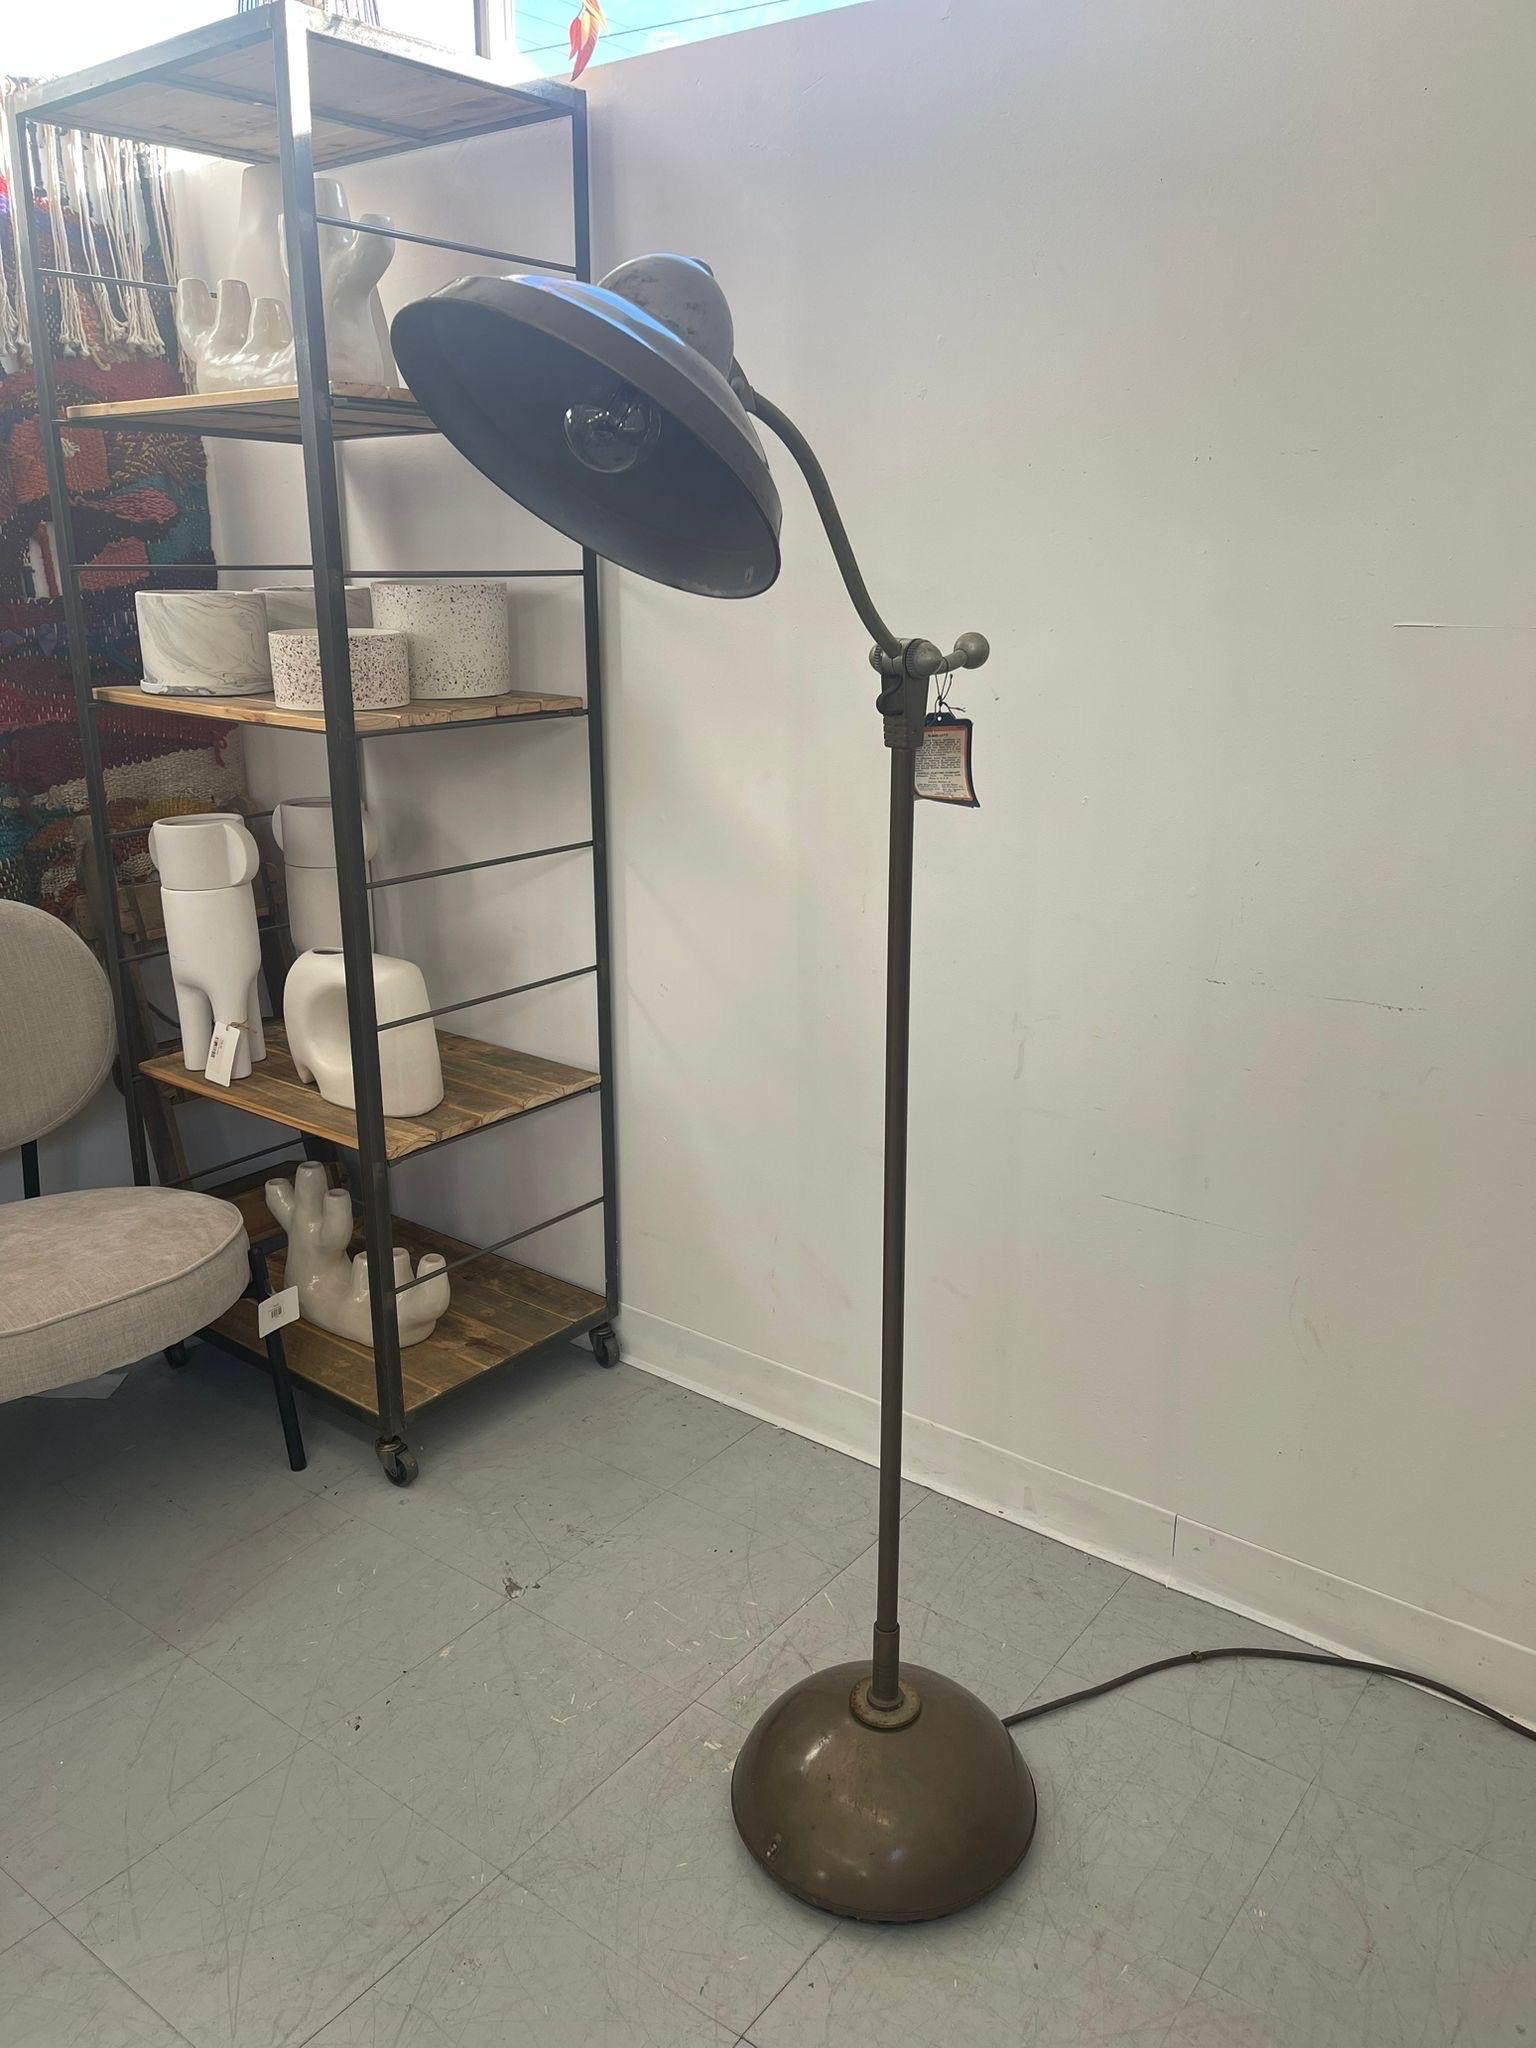 Vintage Fully Functional Lamp From General Electric. Perfect for a Stem Punk / Machine Age Aesthetic. Original Tag Attached. Both the Head and The Neck are Adjustable Components. Possibly 1920s. Slight Tarnishing. Vintage Condition Consistent with